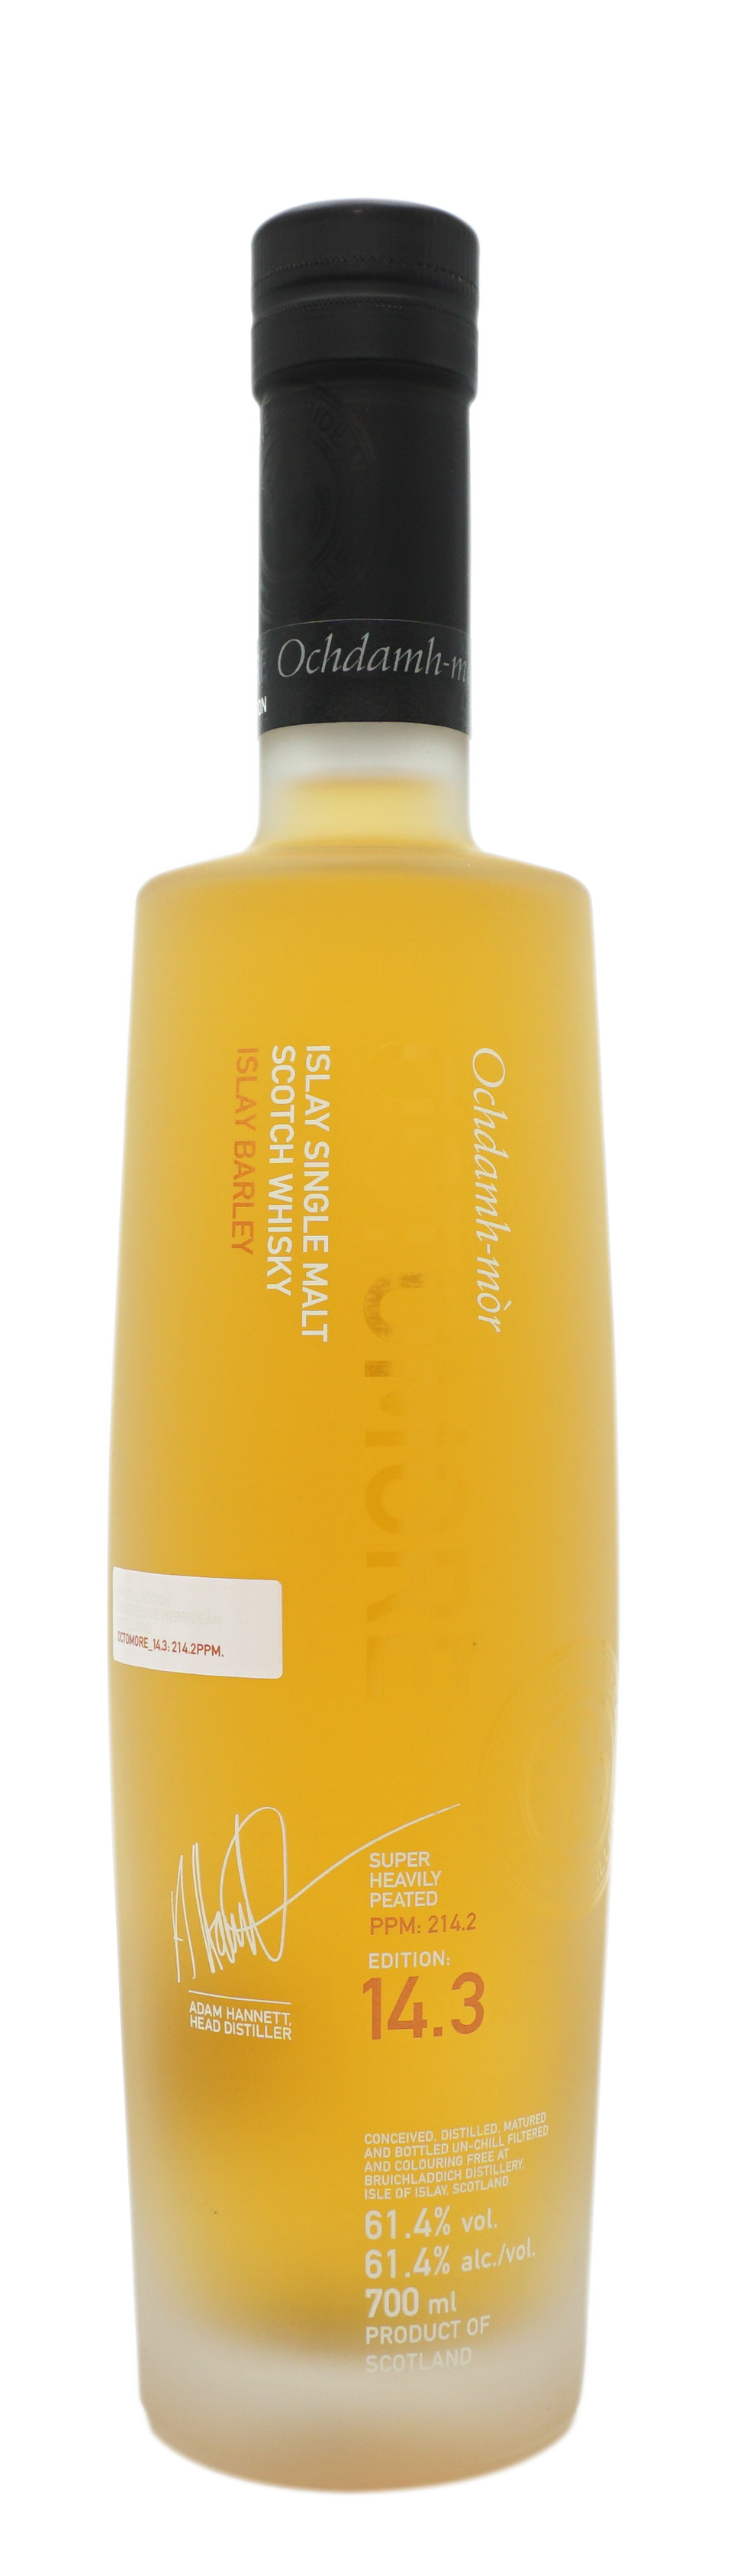 Octomore 14.3 214,4PPM 61,4% Fles